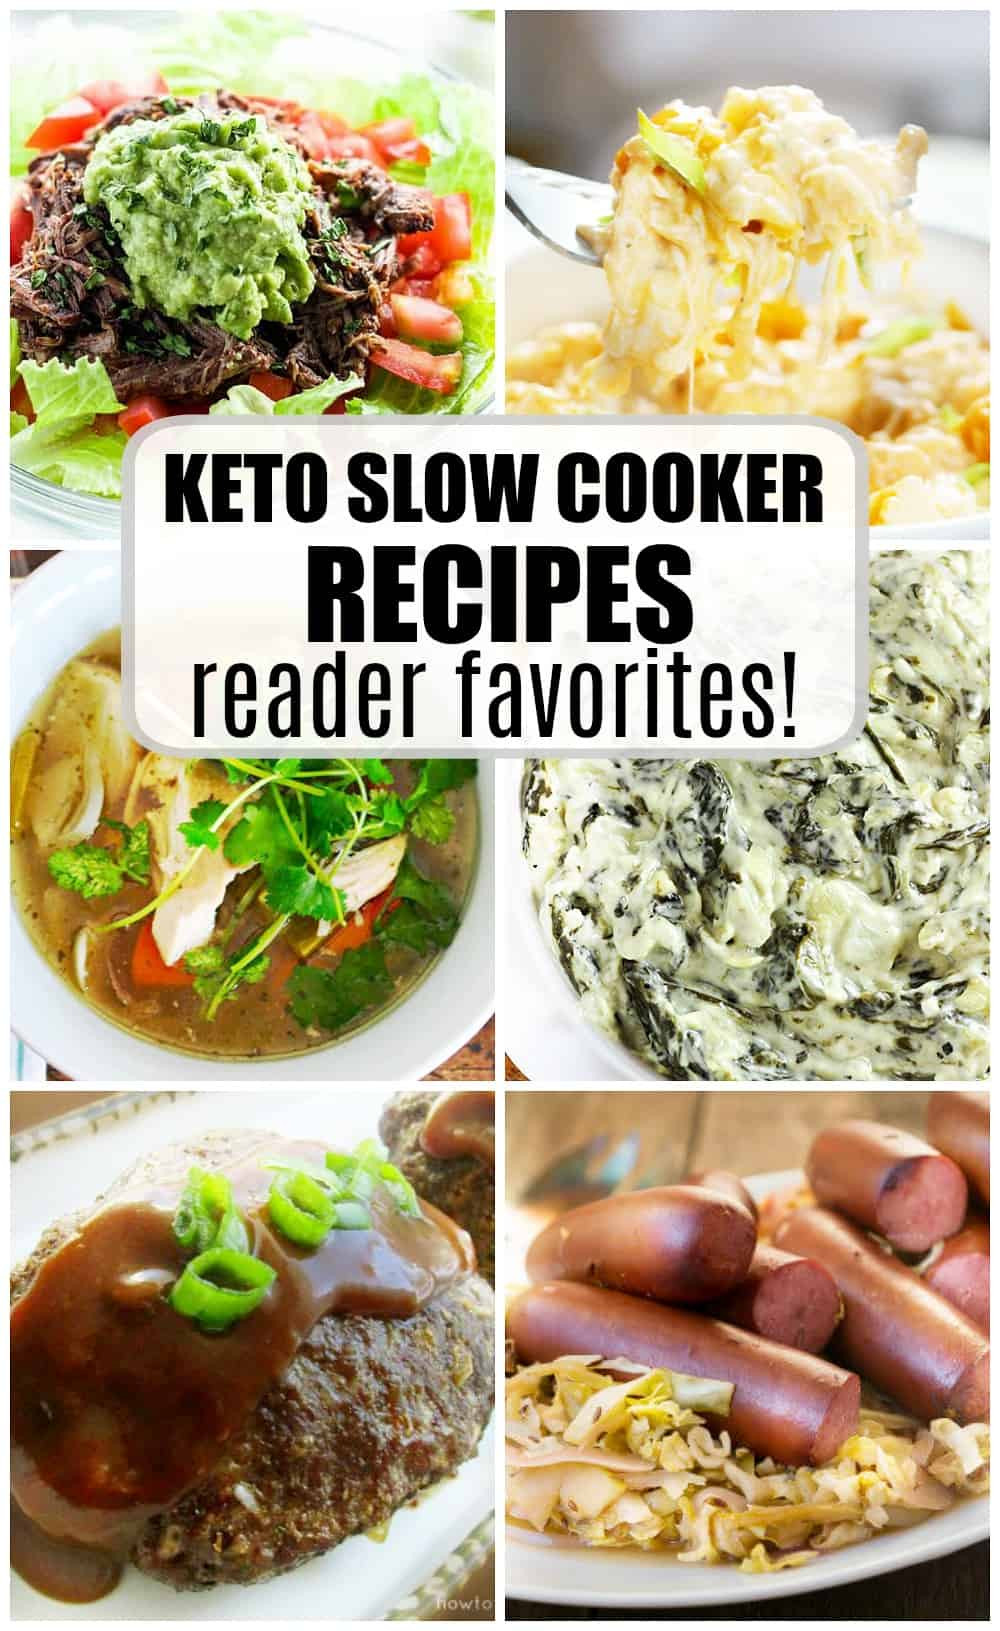 Low Cholesterol Slow Cooker Recipes
 KETO Slow Cooker Recipes Low Carb High Fat Some of the Best